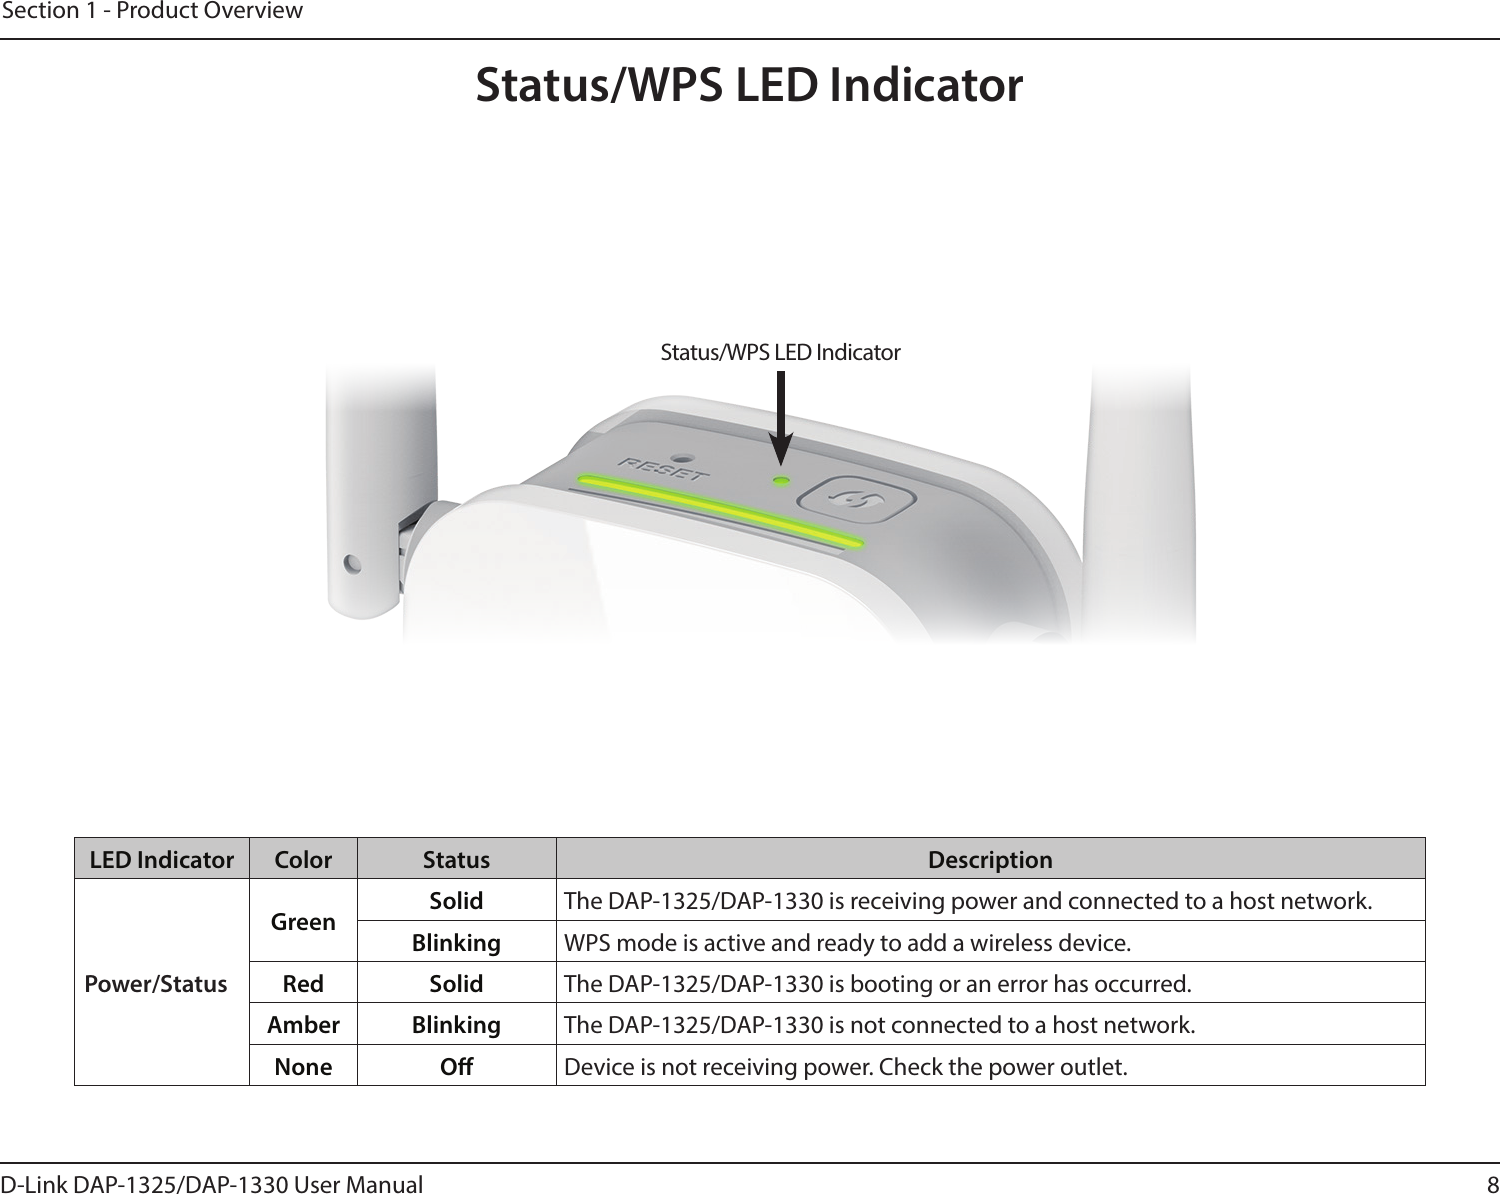 8D-Link DAP-1325/DAP-1330 User ManualSection 1 - Product OverviewLED Indicator Color Status DescriptionPower/StatusGreen  Solid The DAP-1325/DAP-1330 is receiving power and connected to a host network.Blinking WPS mode is active and ready to add a wireless device.Red Solid The DAP-1325/DAP-1330 is booting or an error has occurred.Amber Blinking The DAP-1325/DAP-1330 is not connected to a host network.None O Device is not receiving power. Check the power outlet. Status/WPS LED IndicatorStatus/WPS LED Indicator